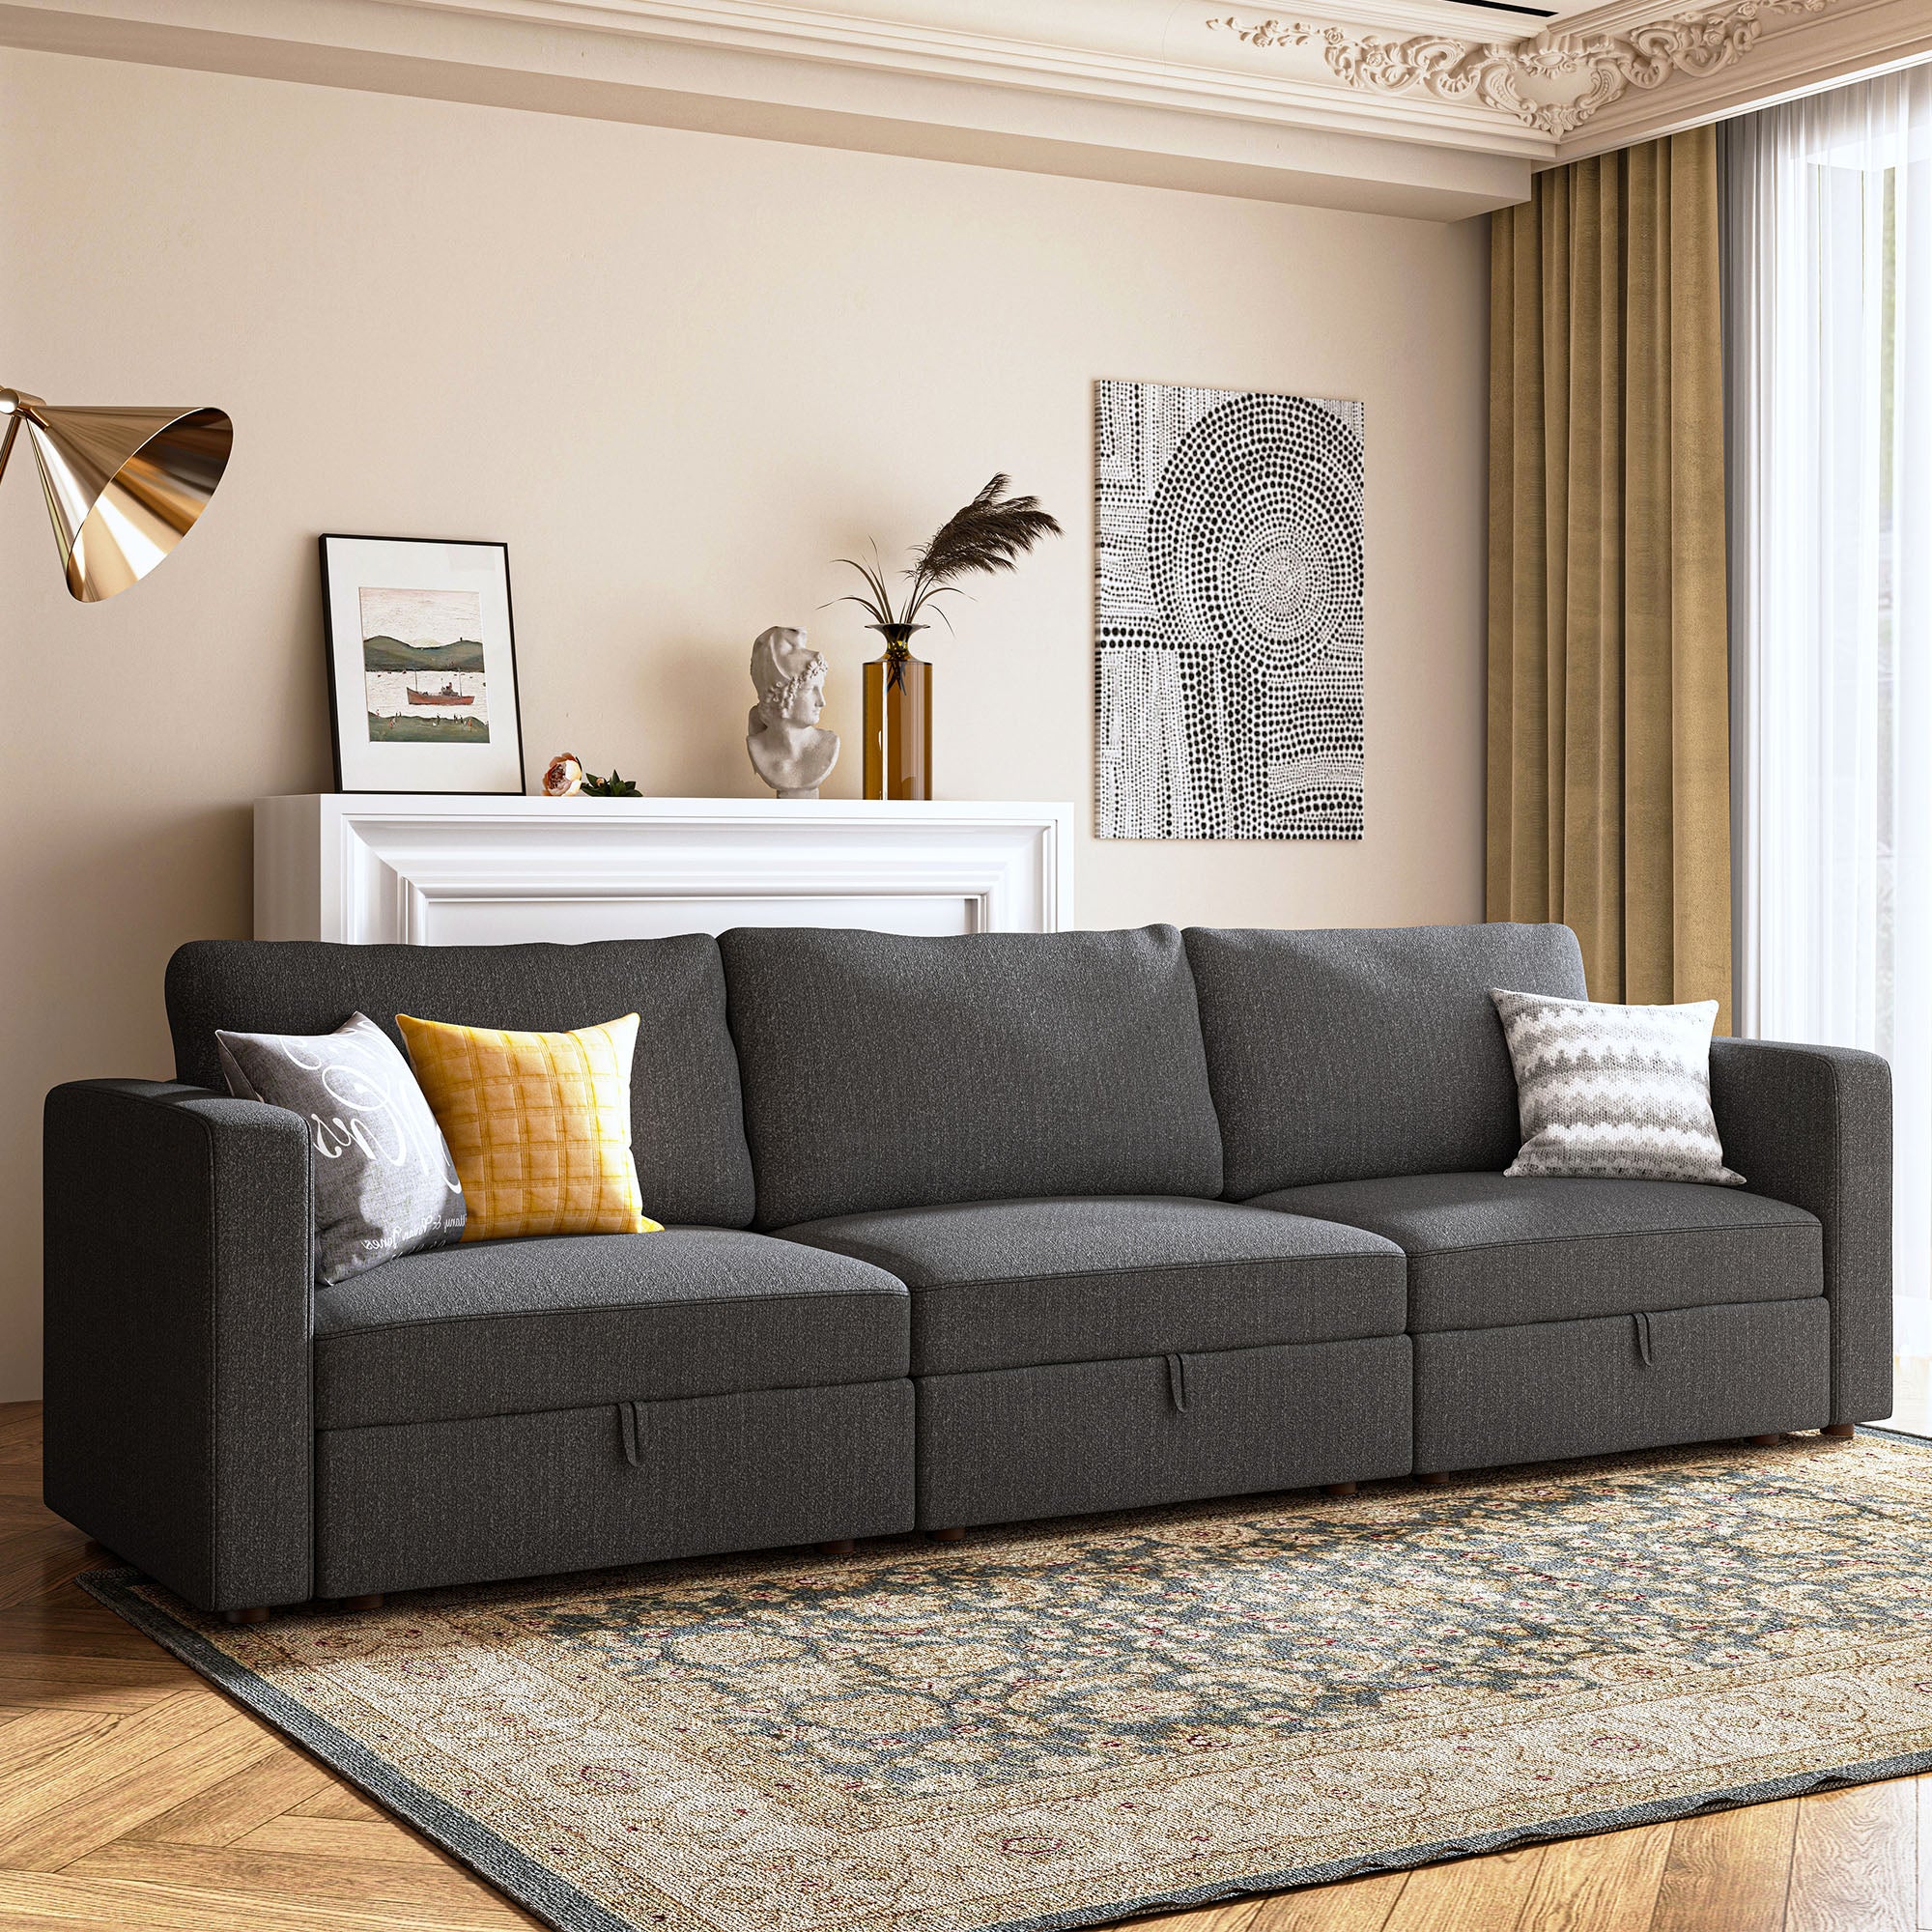 HONBAY Polyester Spacious 3 Seaters Customized Modular Sofa Couch with Storage Space for Living Room